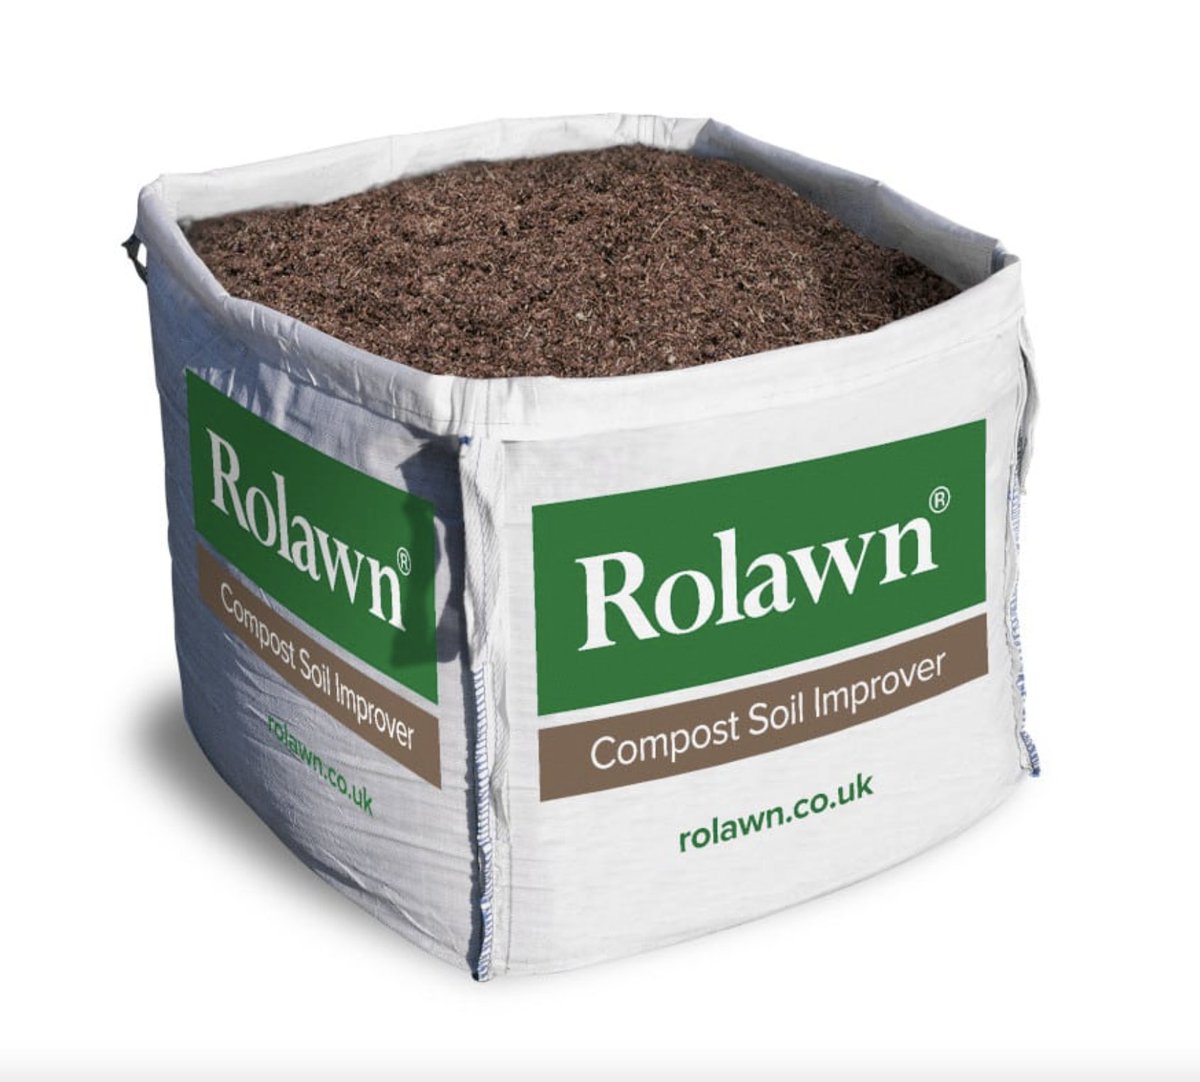 What’s so great about our Compost Soil Improver? Glad you asked! ☑️ Peat-free ☑️ Adds organic matter ☑️ Improves soil fertility ☑️ Improves moisture and nutrient retention ☑️ Friable and light ☑️ Peat free hubs.ly/Q027wJ130